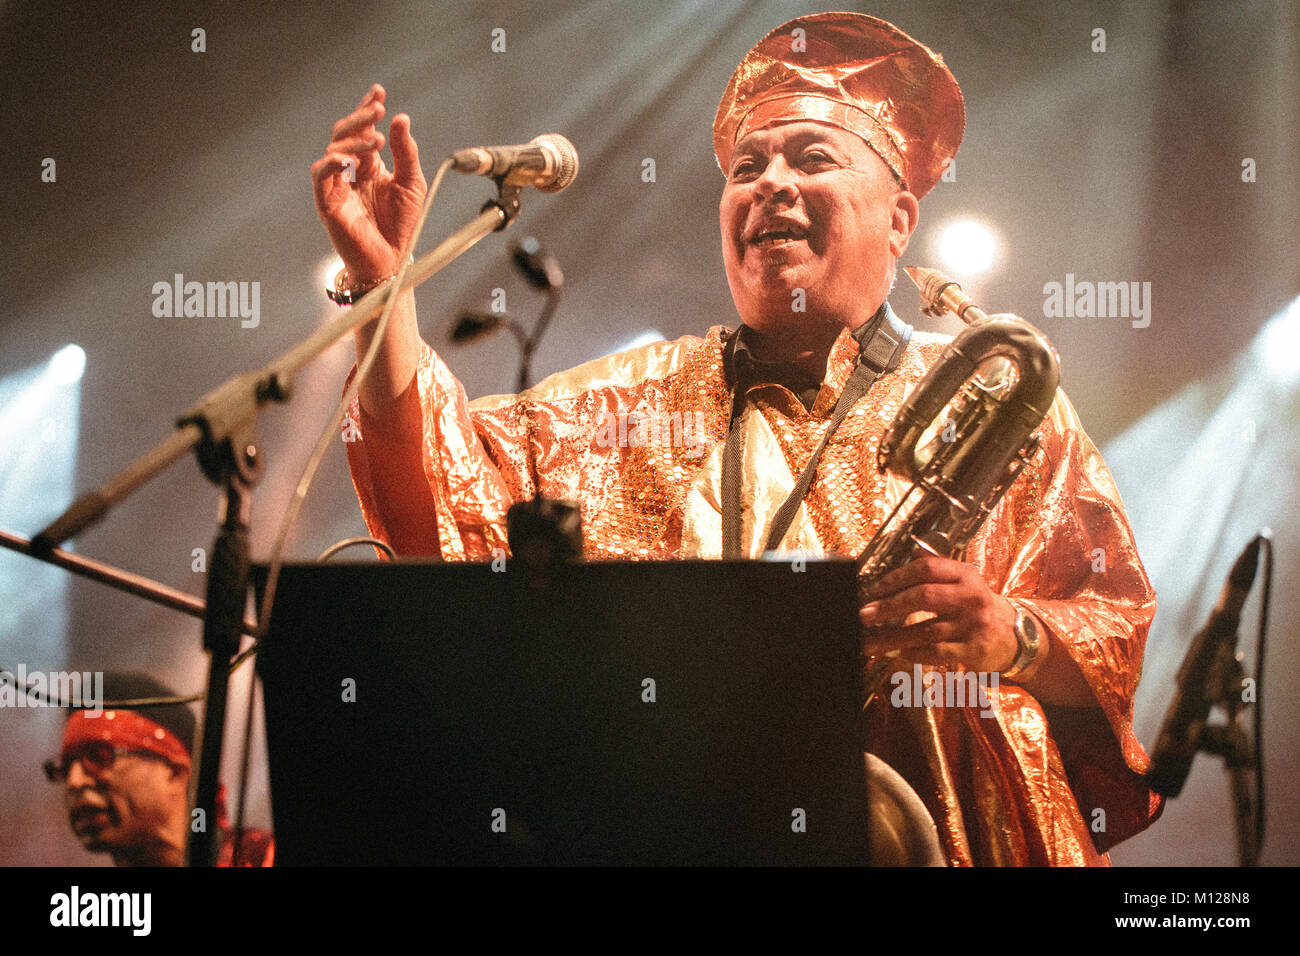 The American avant-garde jazz group Sun Ra Arkestra performs a live concert at the Polish music festival Off Festival 2015 in Katowice. Here musician Danny Ray is pictured live on stage. Poland, 08/08 2015. Stock Photo